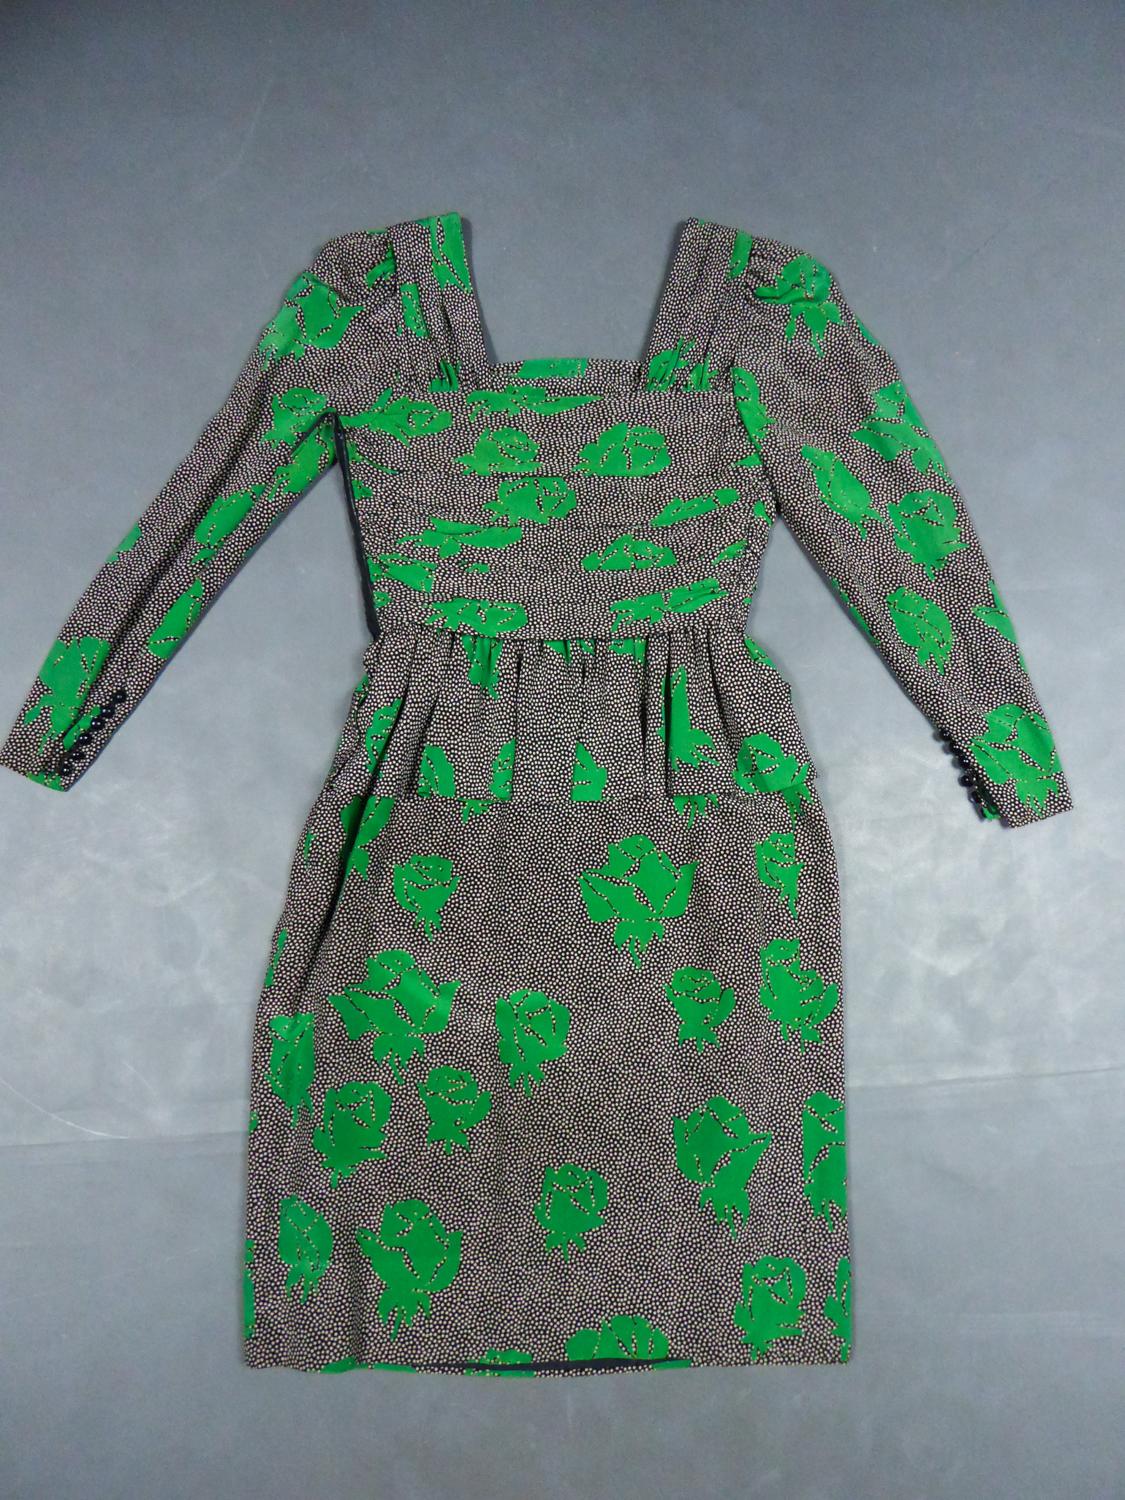 Circa 1980
France Paris

Jeanne Lanvin Haute Couture mid-length dress in printed silk by Jules-François Grahay who directed the designer house until 1984. Black silk crepe printed with white dots and stylized green roses arranged randomly. Dress